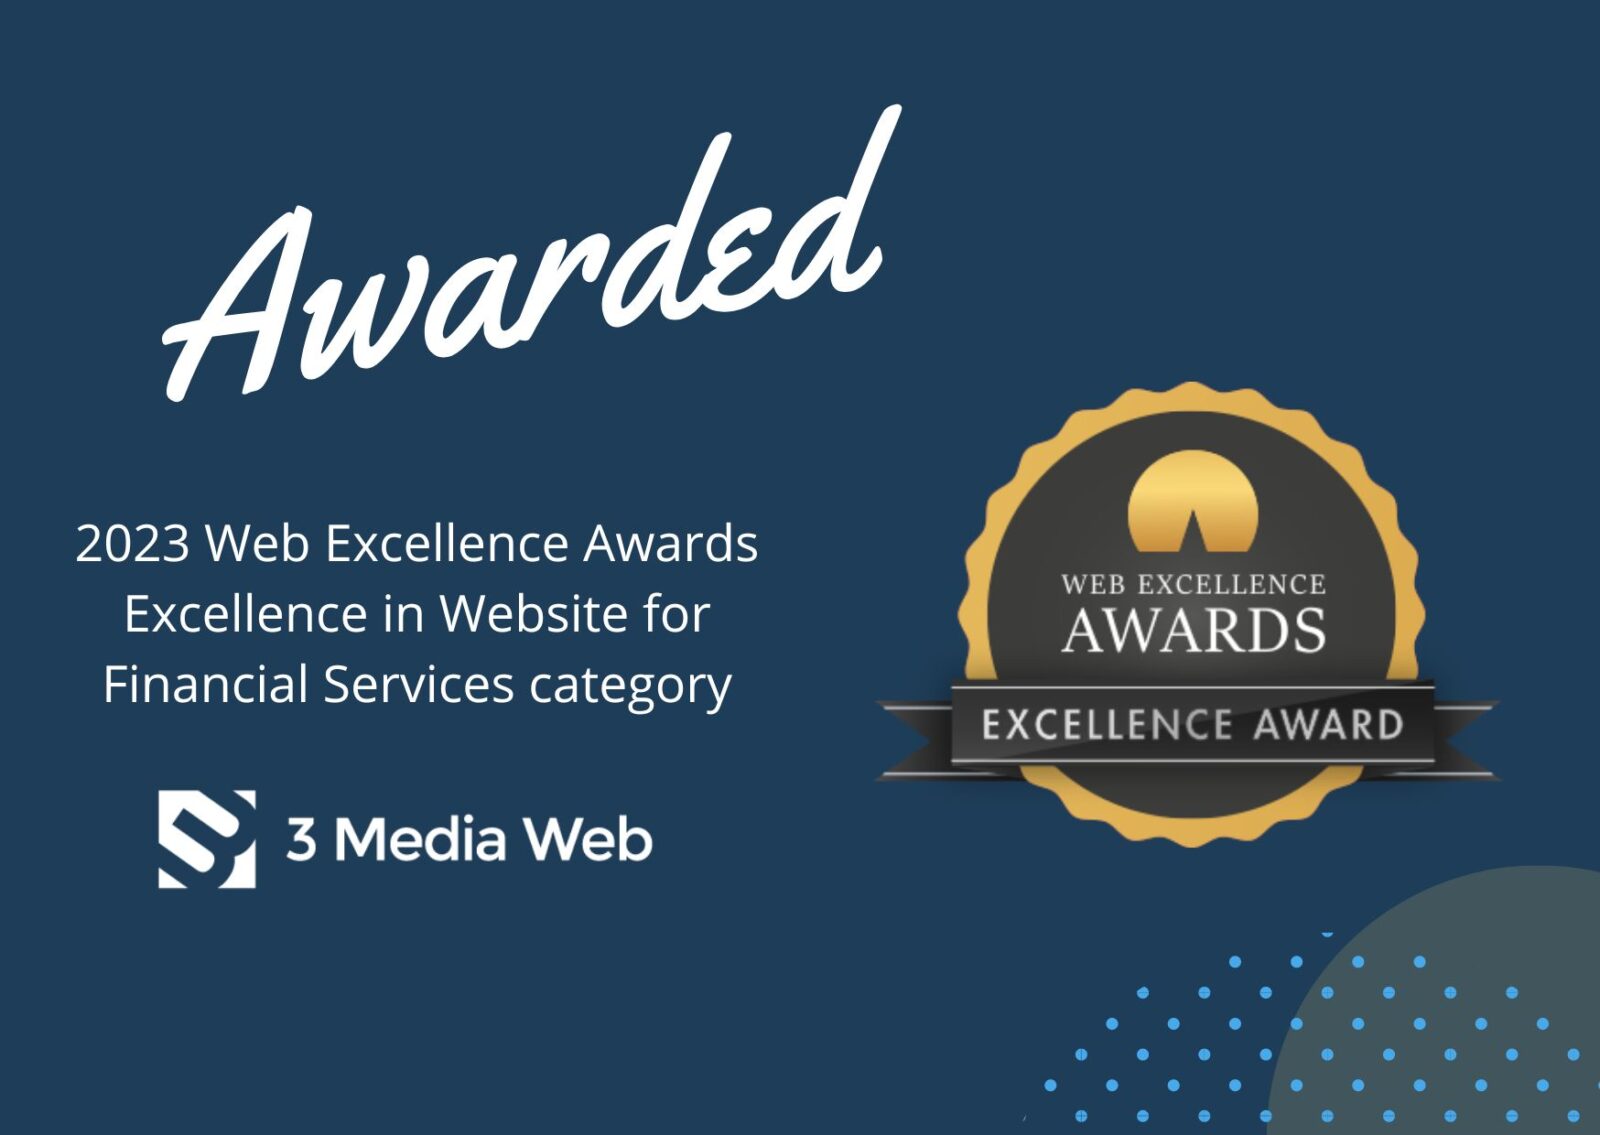 We're honored to be recognized by the Web Excellence Awards.